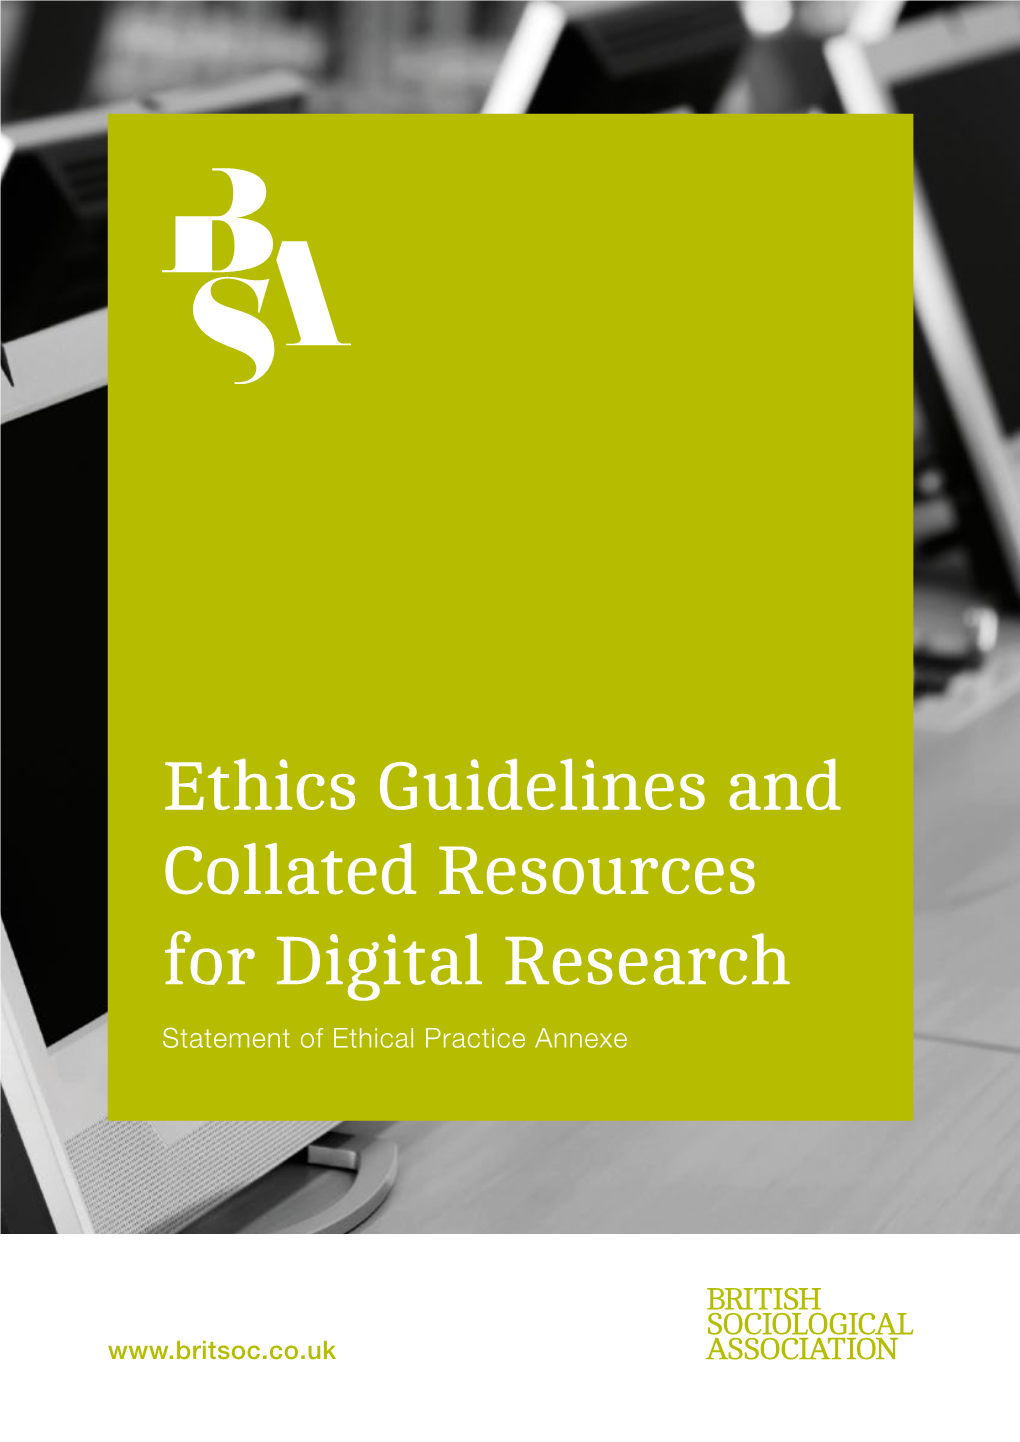 Ethics Guidelines and Collated Resources for Digital Research Statement of Ethical Practice Annexe